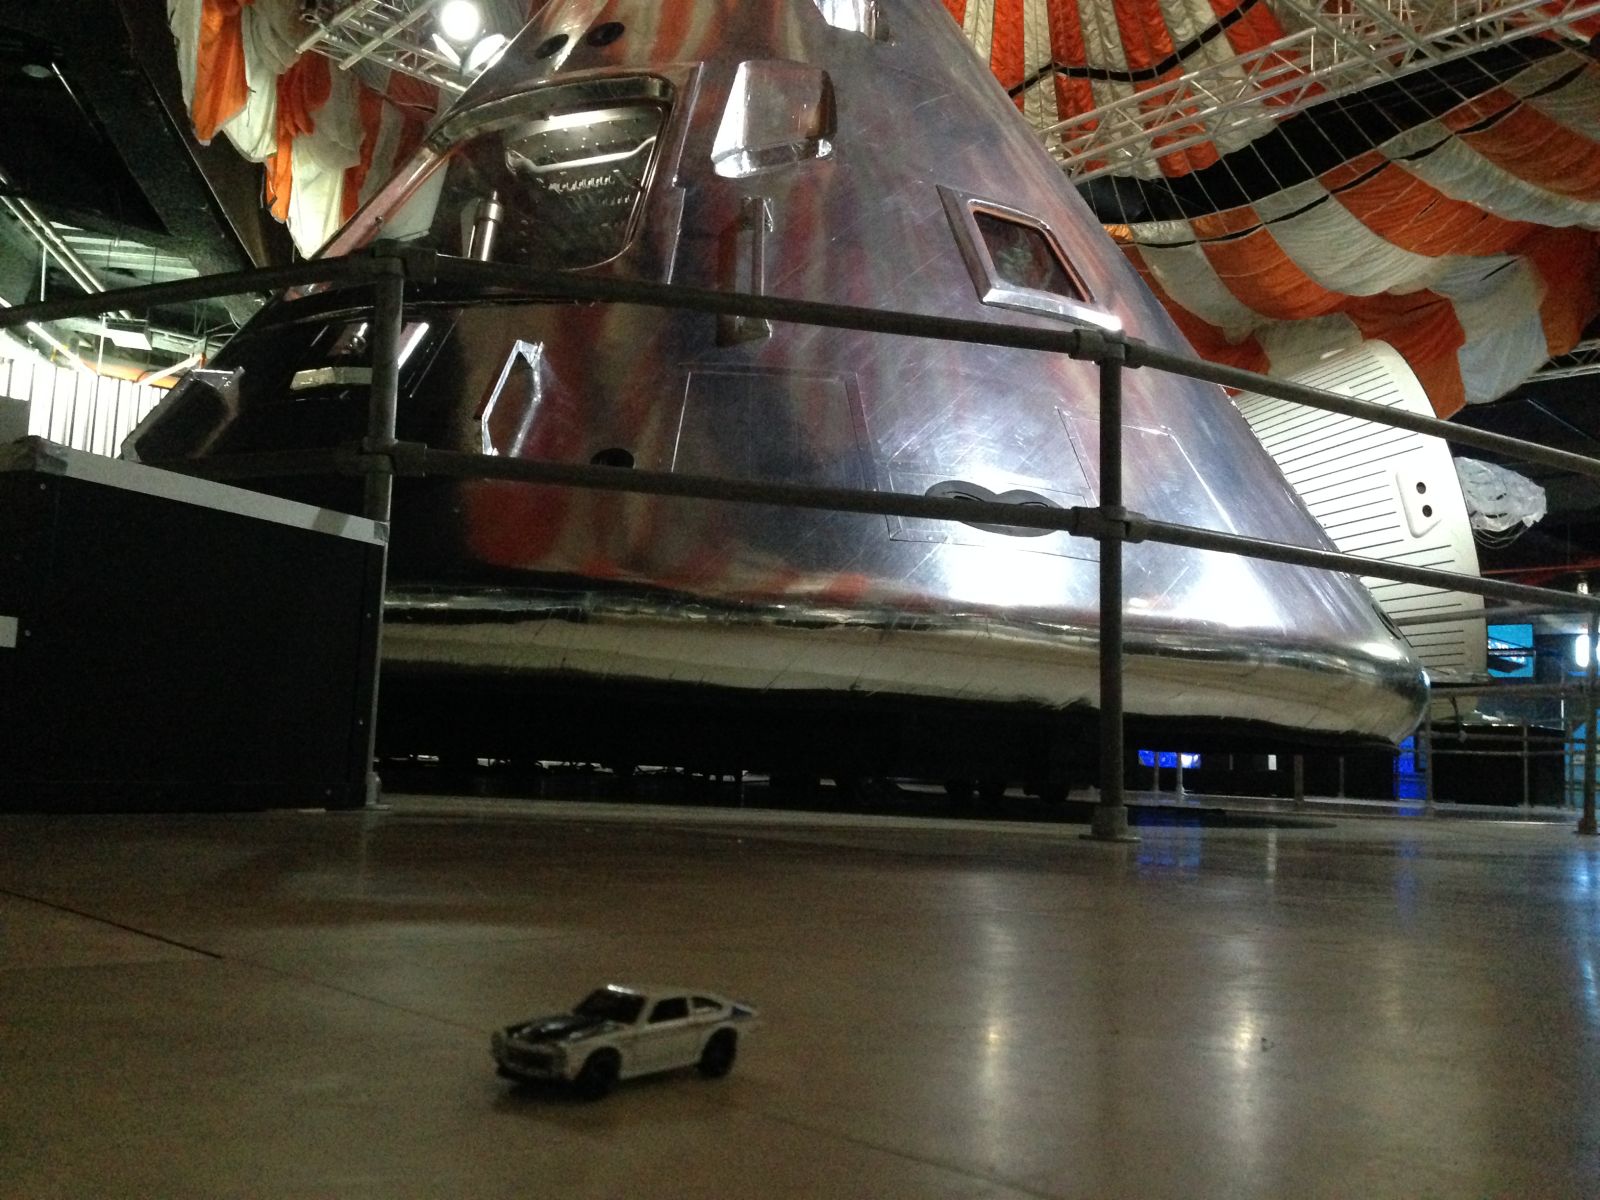 Replica of the Apollo Command Module with the parachute mounted on the ceiling